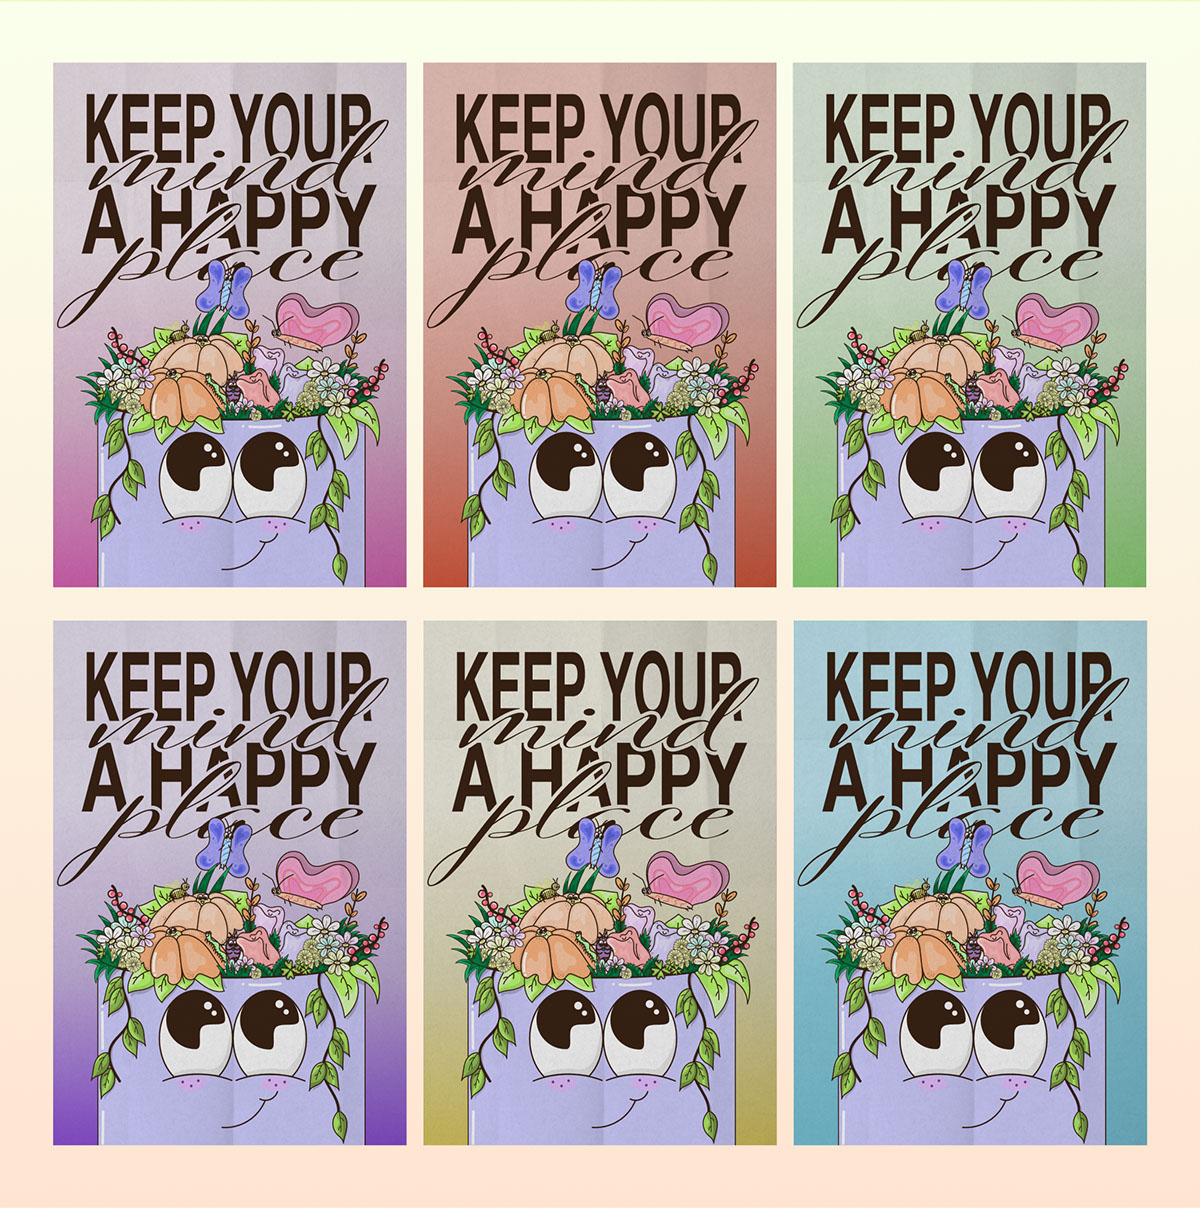 Keep Your Mind A Happy Place rendition image